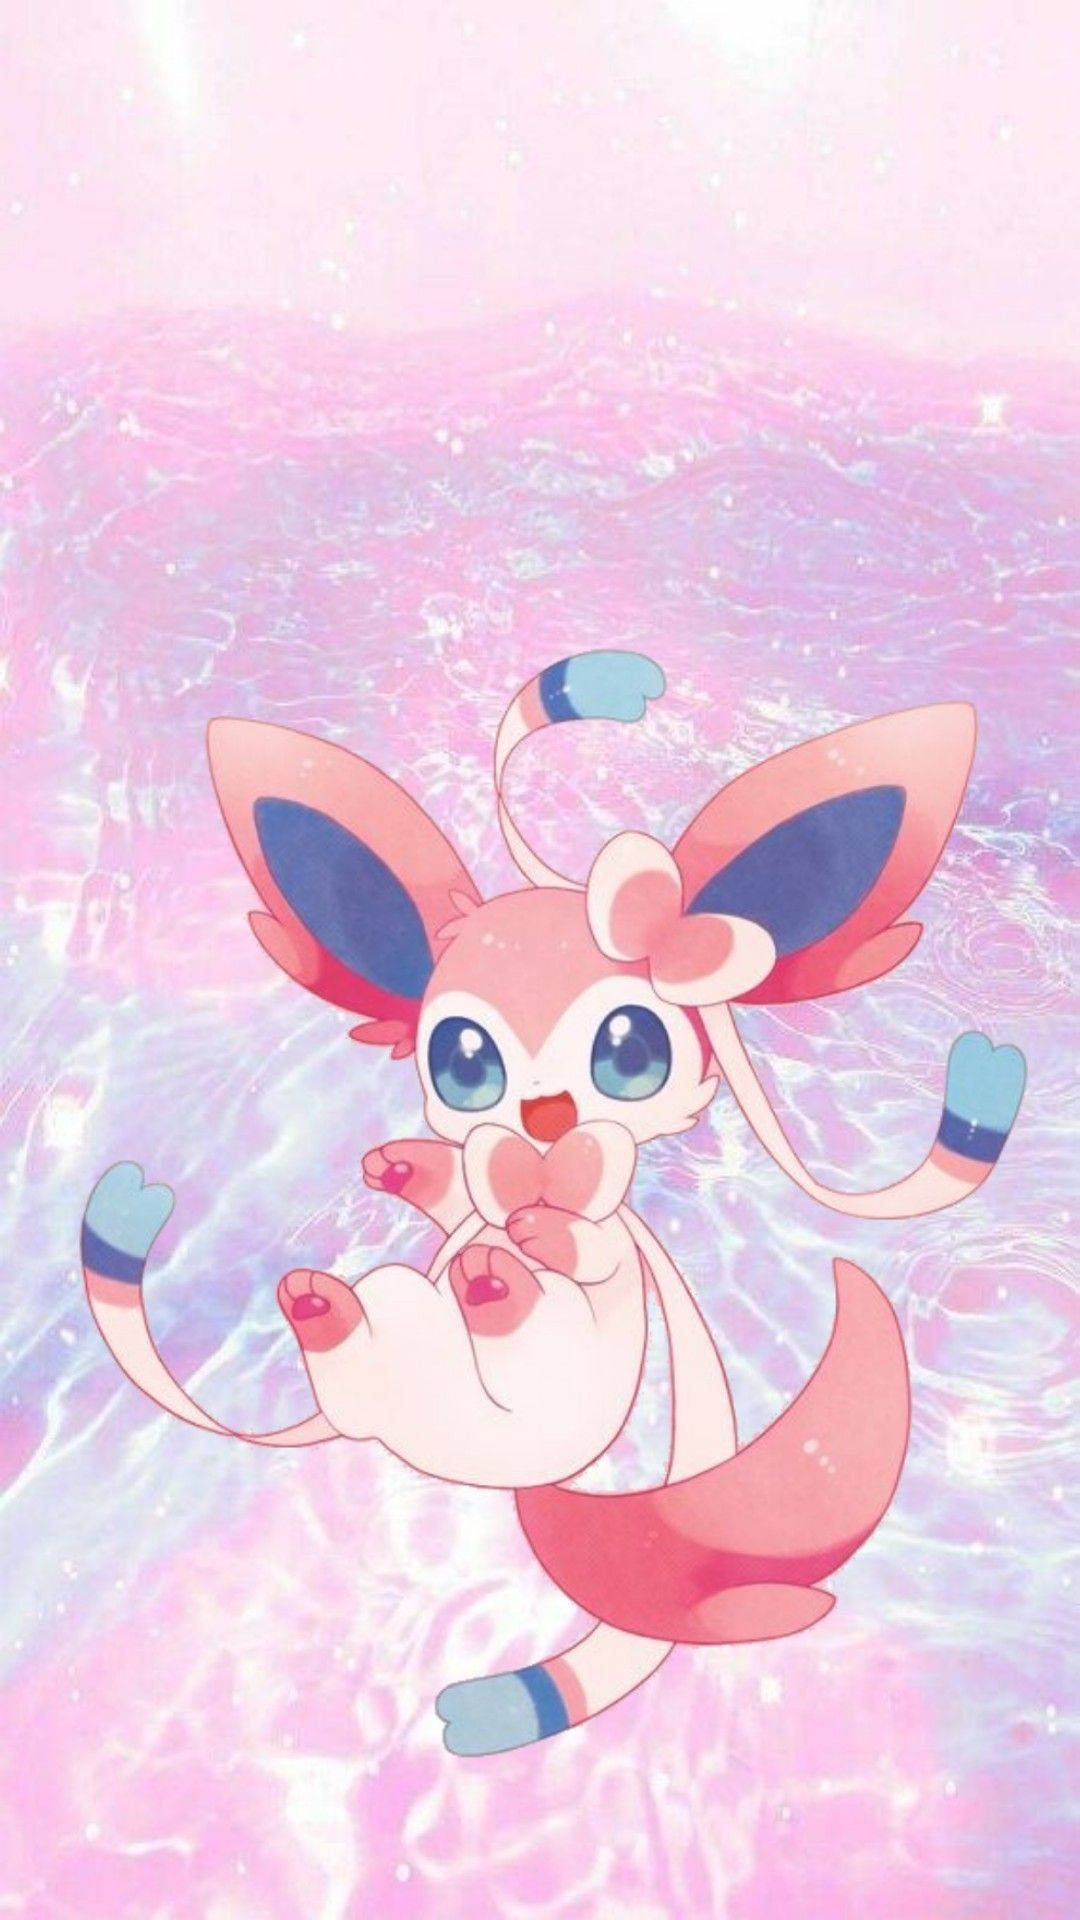 Look At The Amazing Beauty Of This Sylveon Pokemon! Background